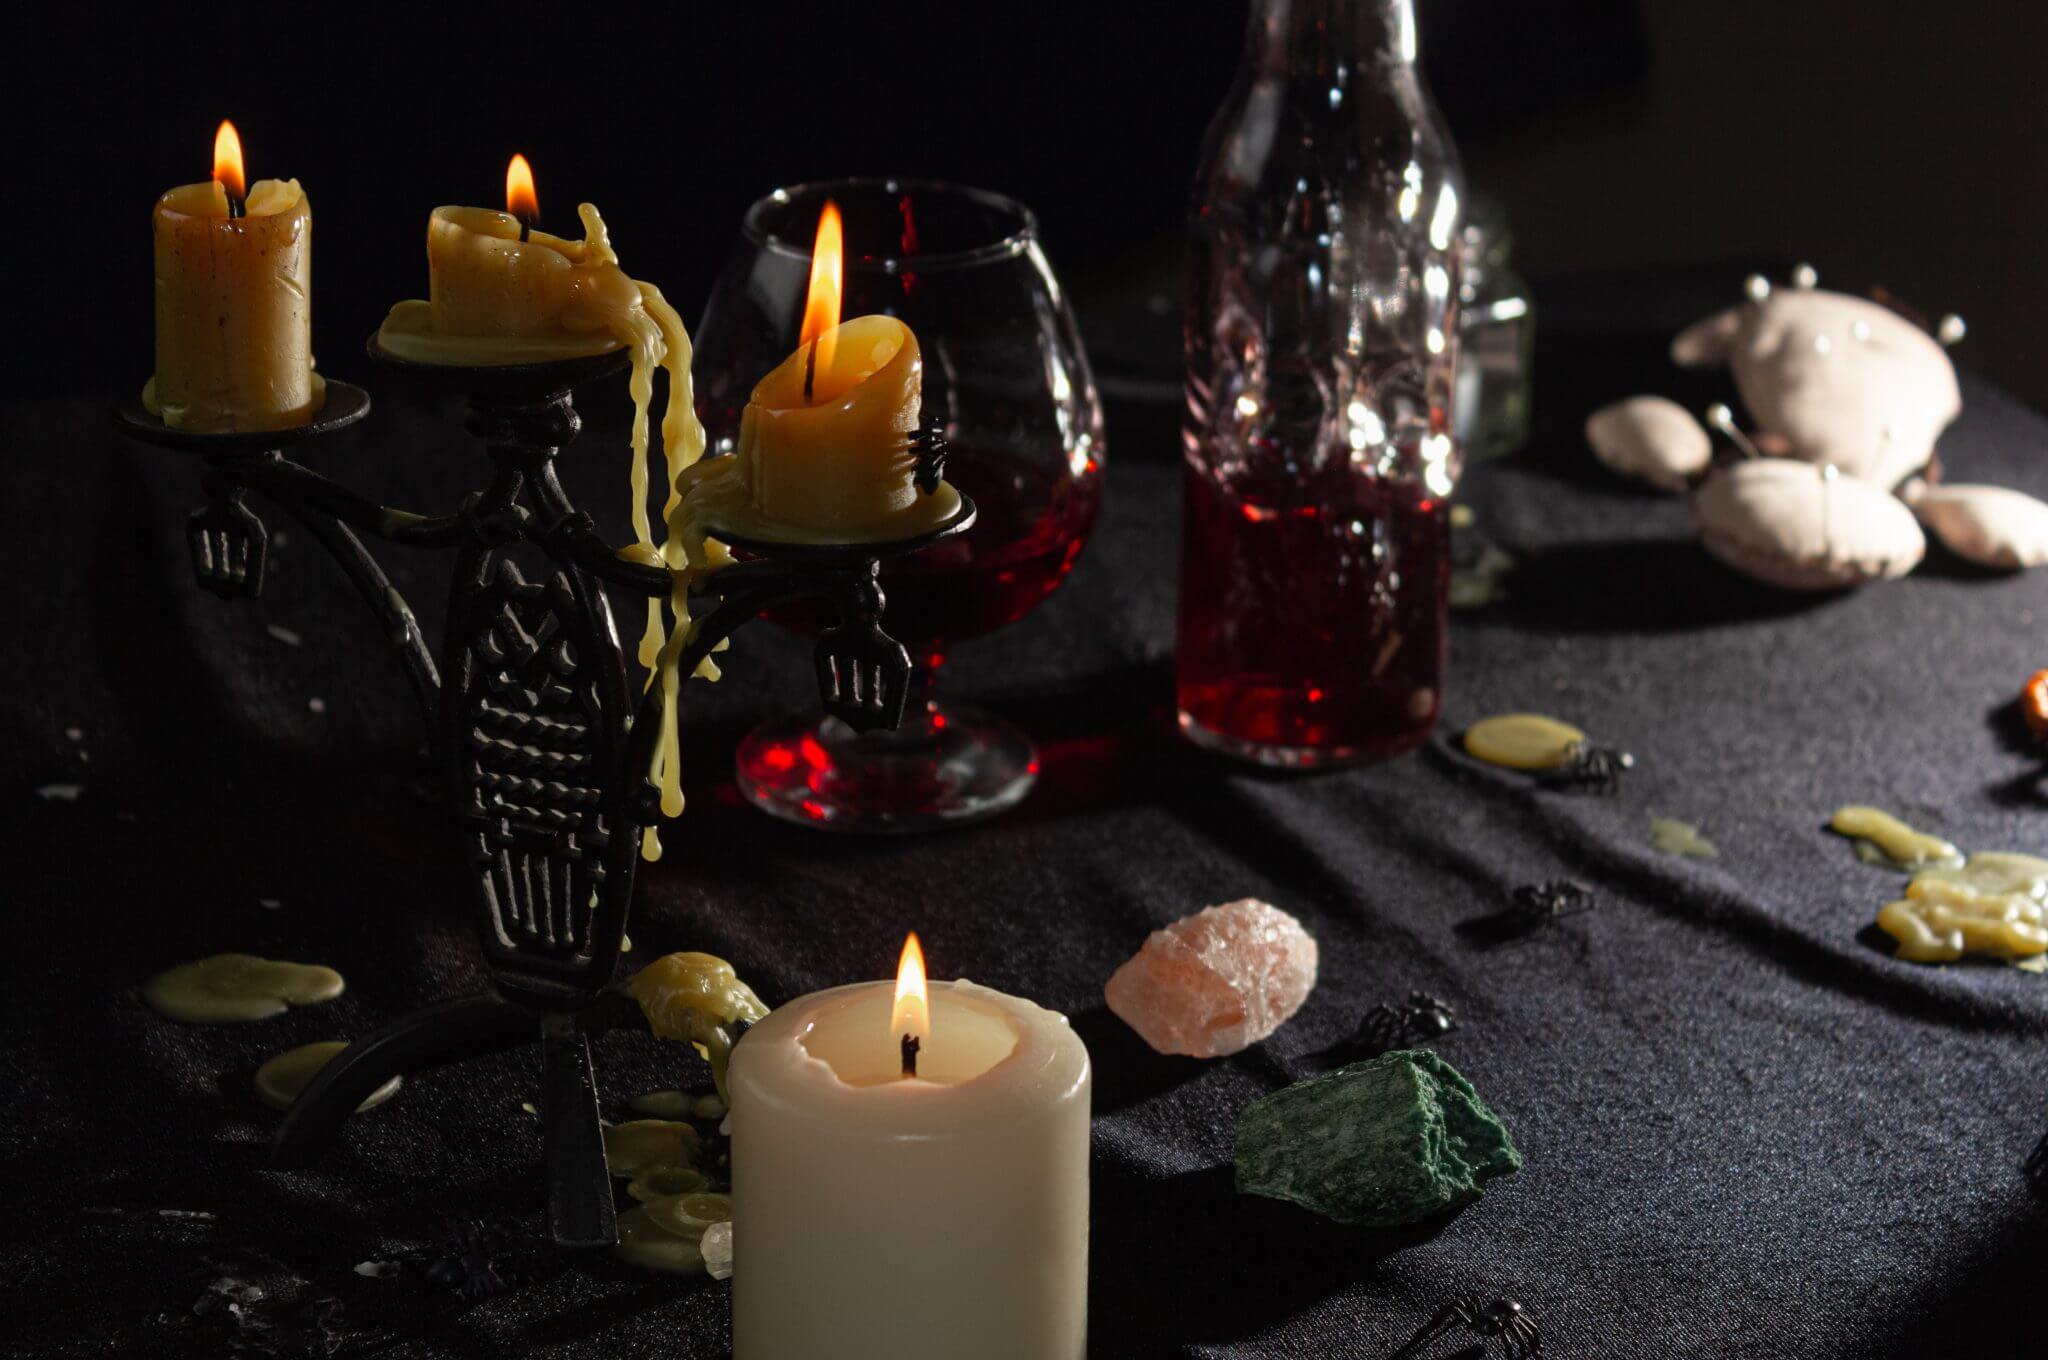 Candle magick is a type of ritual magick that involves using candles as a focus for intention-setting and manifestation.